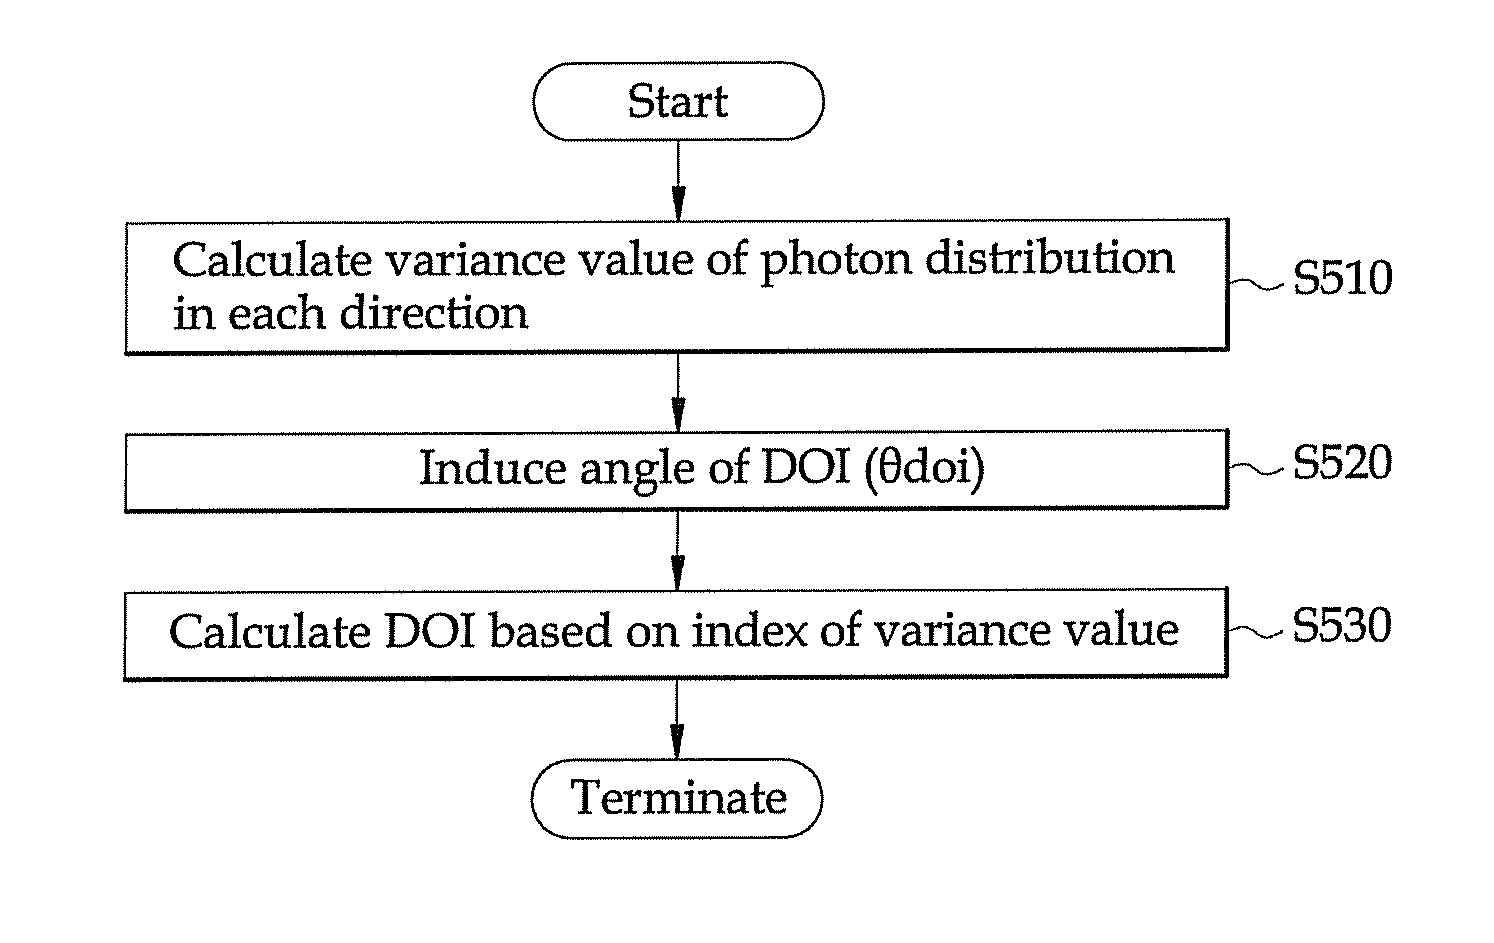 Apparatus and method for measuring depth-of-interaction using light dispersion and positron emission tomography using the same